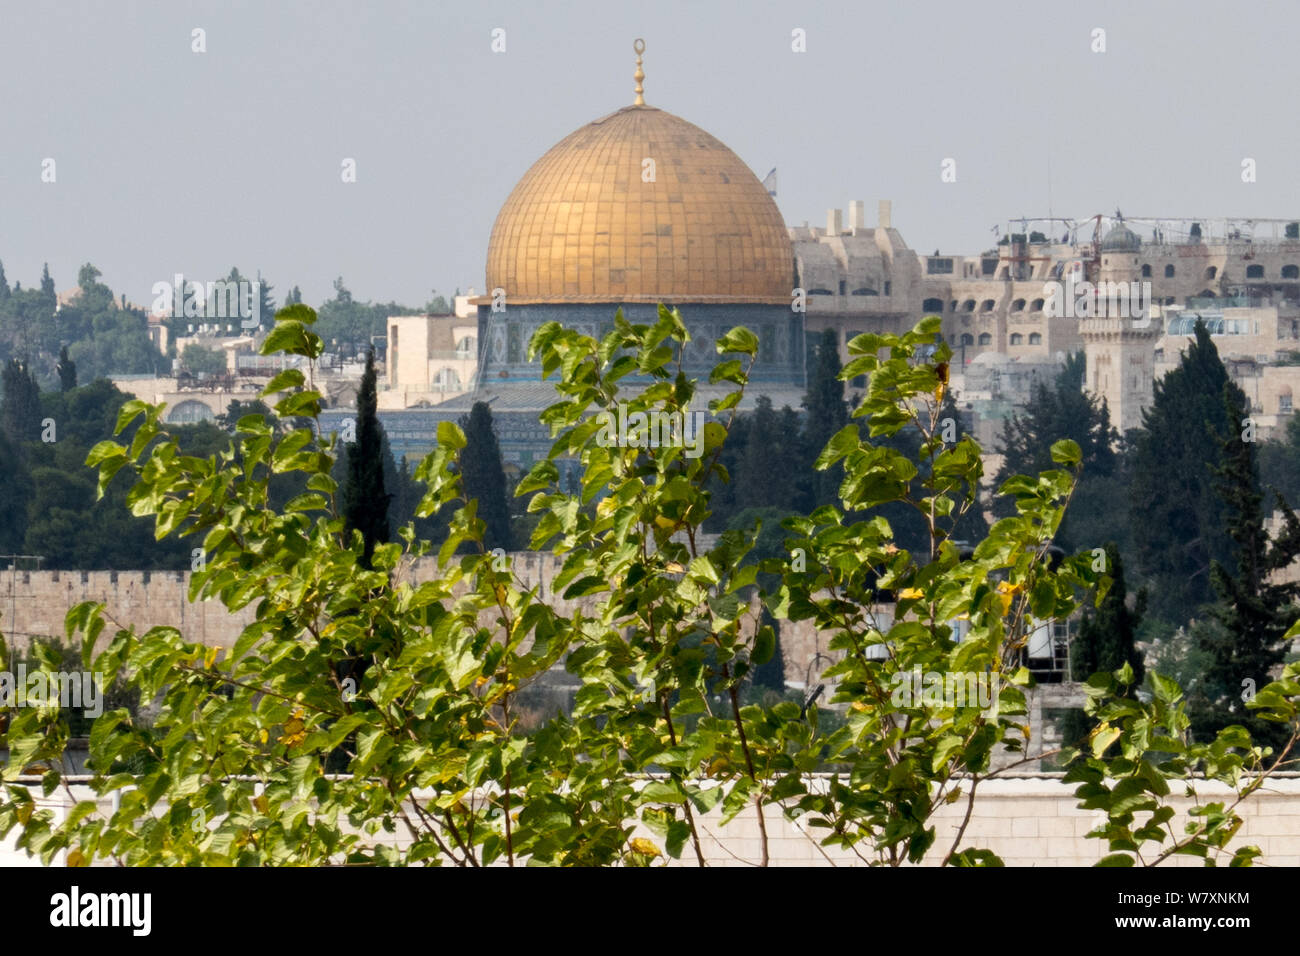 Jerusalem, Israel. 7th August, 2019. The golden Dome of the Rock and mosque of Haram al Sharif, The Noble Sanctuary, on Temple Mount was built over the Foundation Stone at the exact location of the Jewish temples. Religious Jews are in the midst of observing the 'Three Weeks' or 'Bein HaMetzarim', a period of mourning over the destruction of the first and second Jewish Temples, a period that will climax on the ninth day of the Jewish month of Av, observed beginning the evening of 10th August, 2019. Credit: Nir Alon/Alamy Live News. Stock Photo